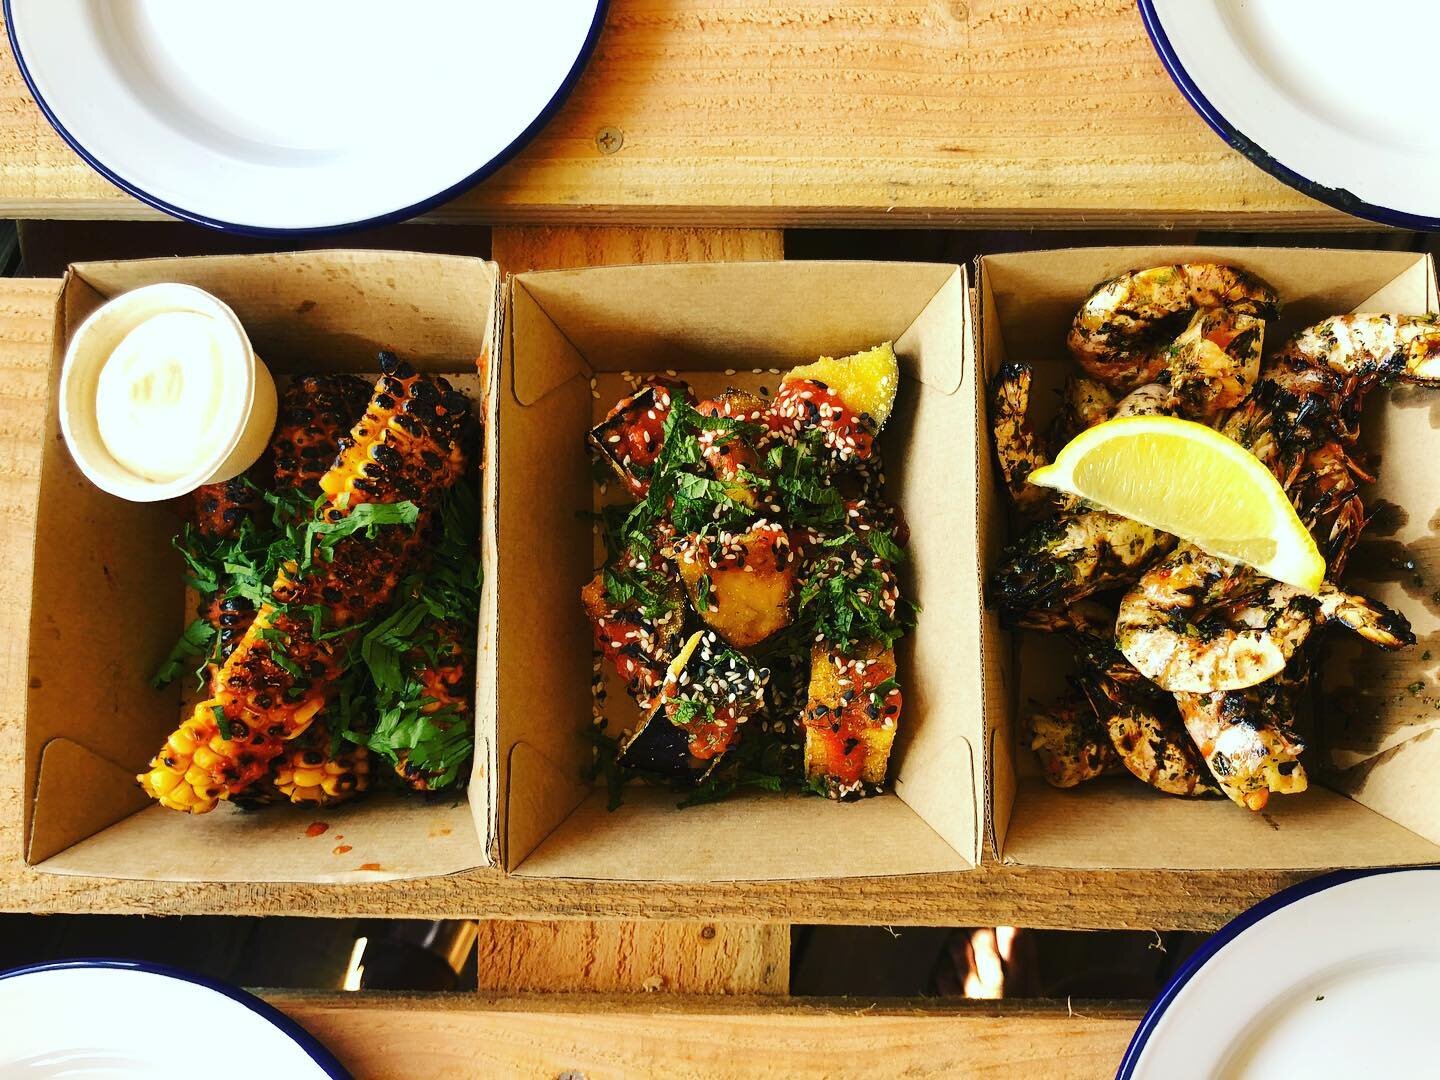 Whoopity whoop @theboyashore is back better than ever - Aperol Spritz, BBQ corn ribs &amp; prawns, Crispy aubergine, BBQ mackerel and burgers - and BBQ pineapple to finish off - welcome back and hurrah